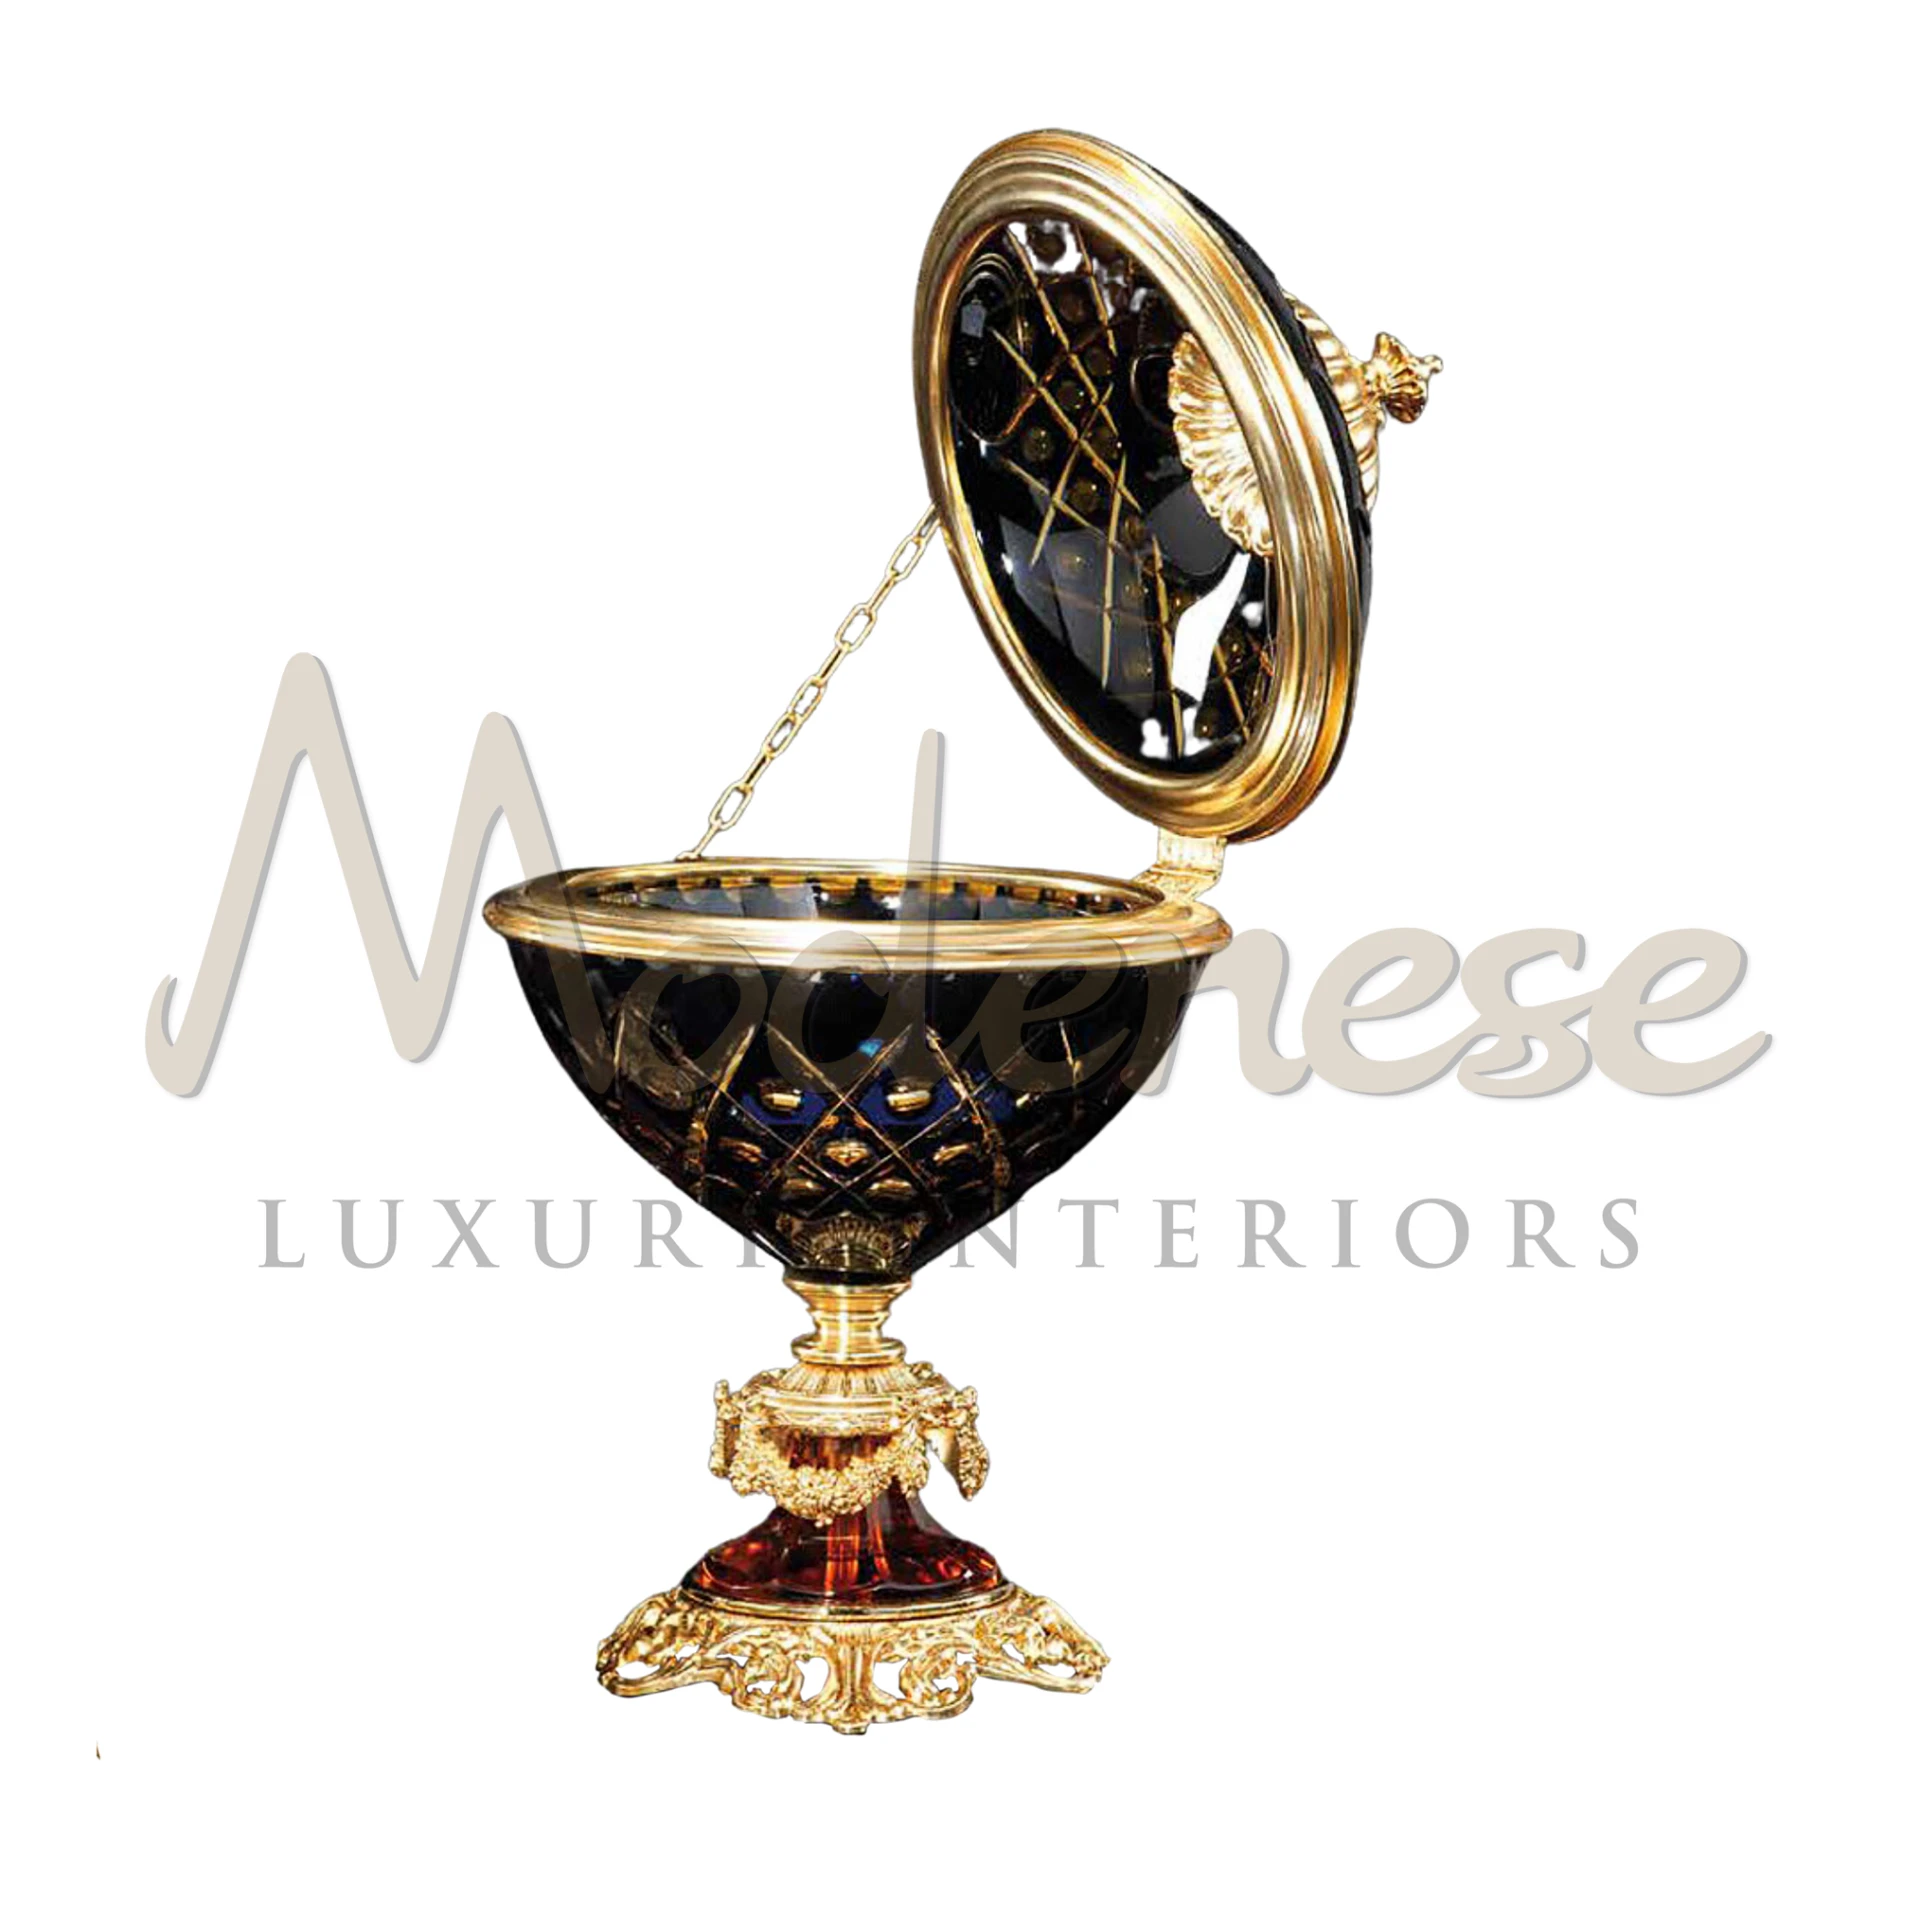 Luxury Black Glass Closed Bowl, a refined statement piece for interiors, perfect for enhancing traditional to modern decor styles.